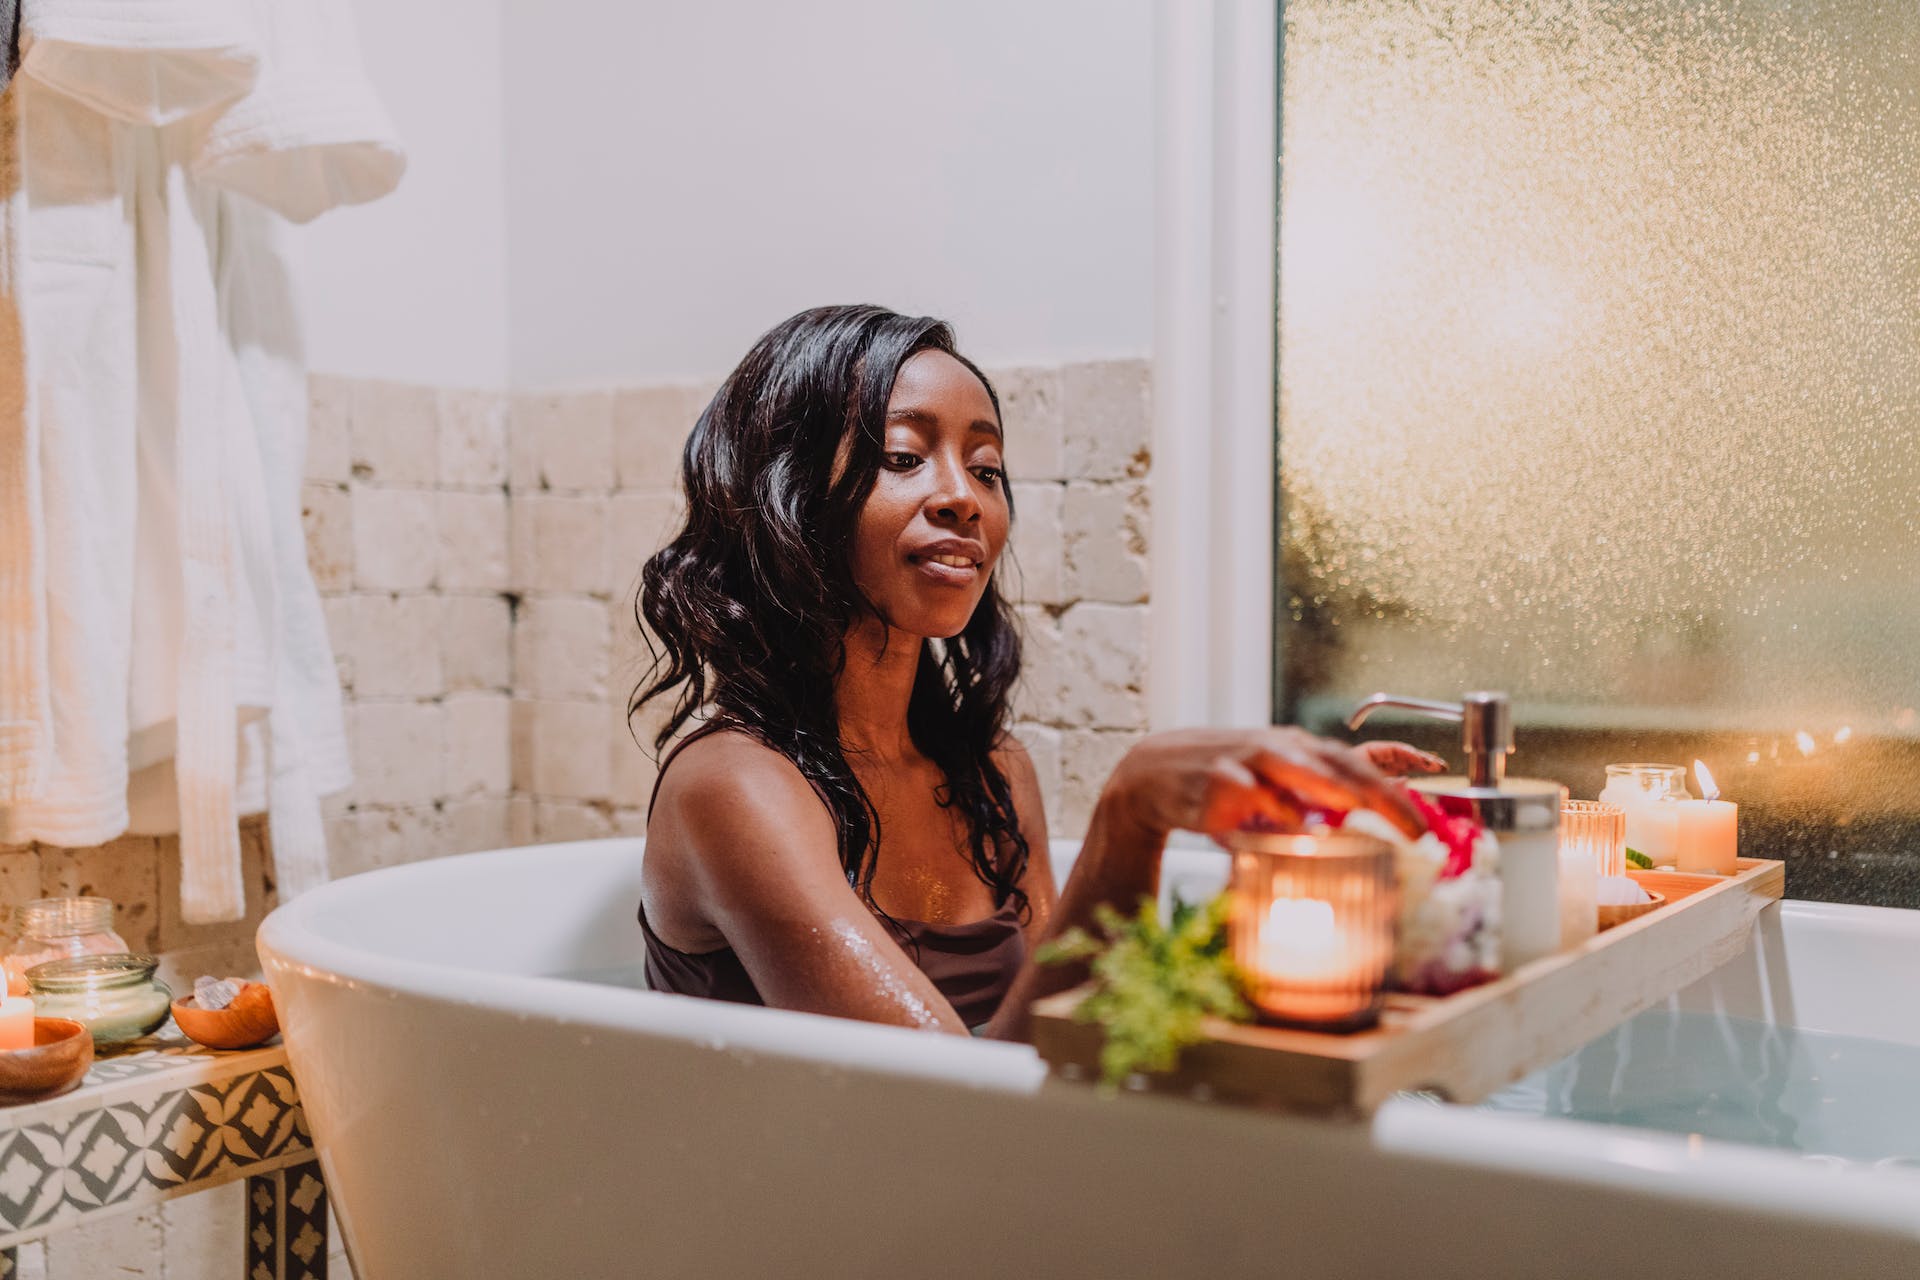 Romanticise your bath time with a soothing bubble bath - Marie